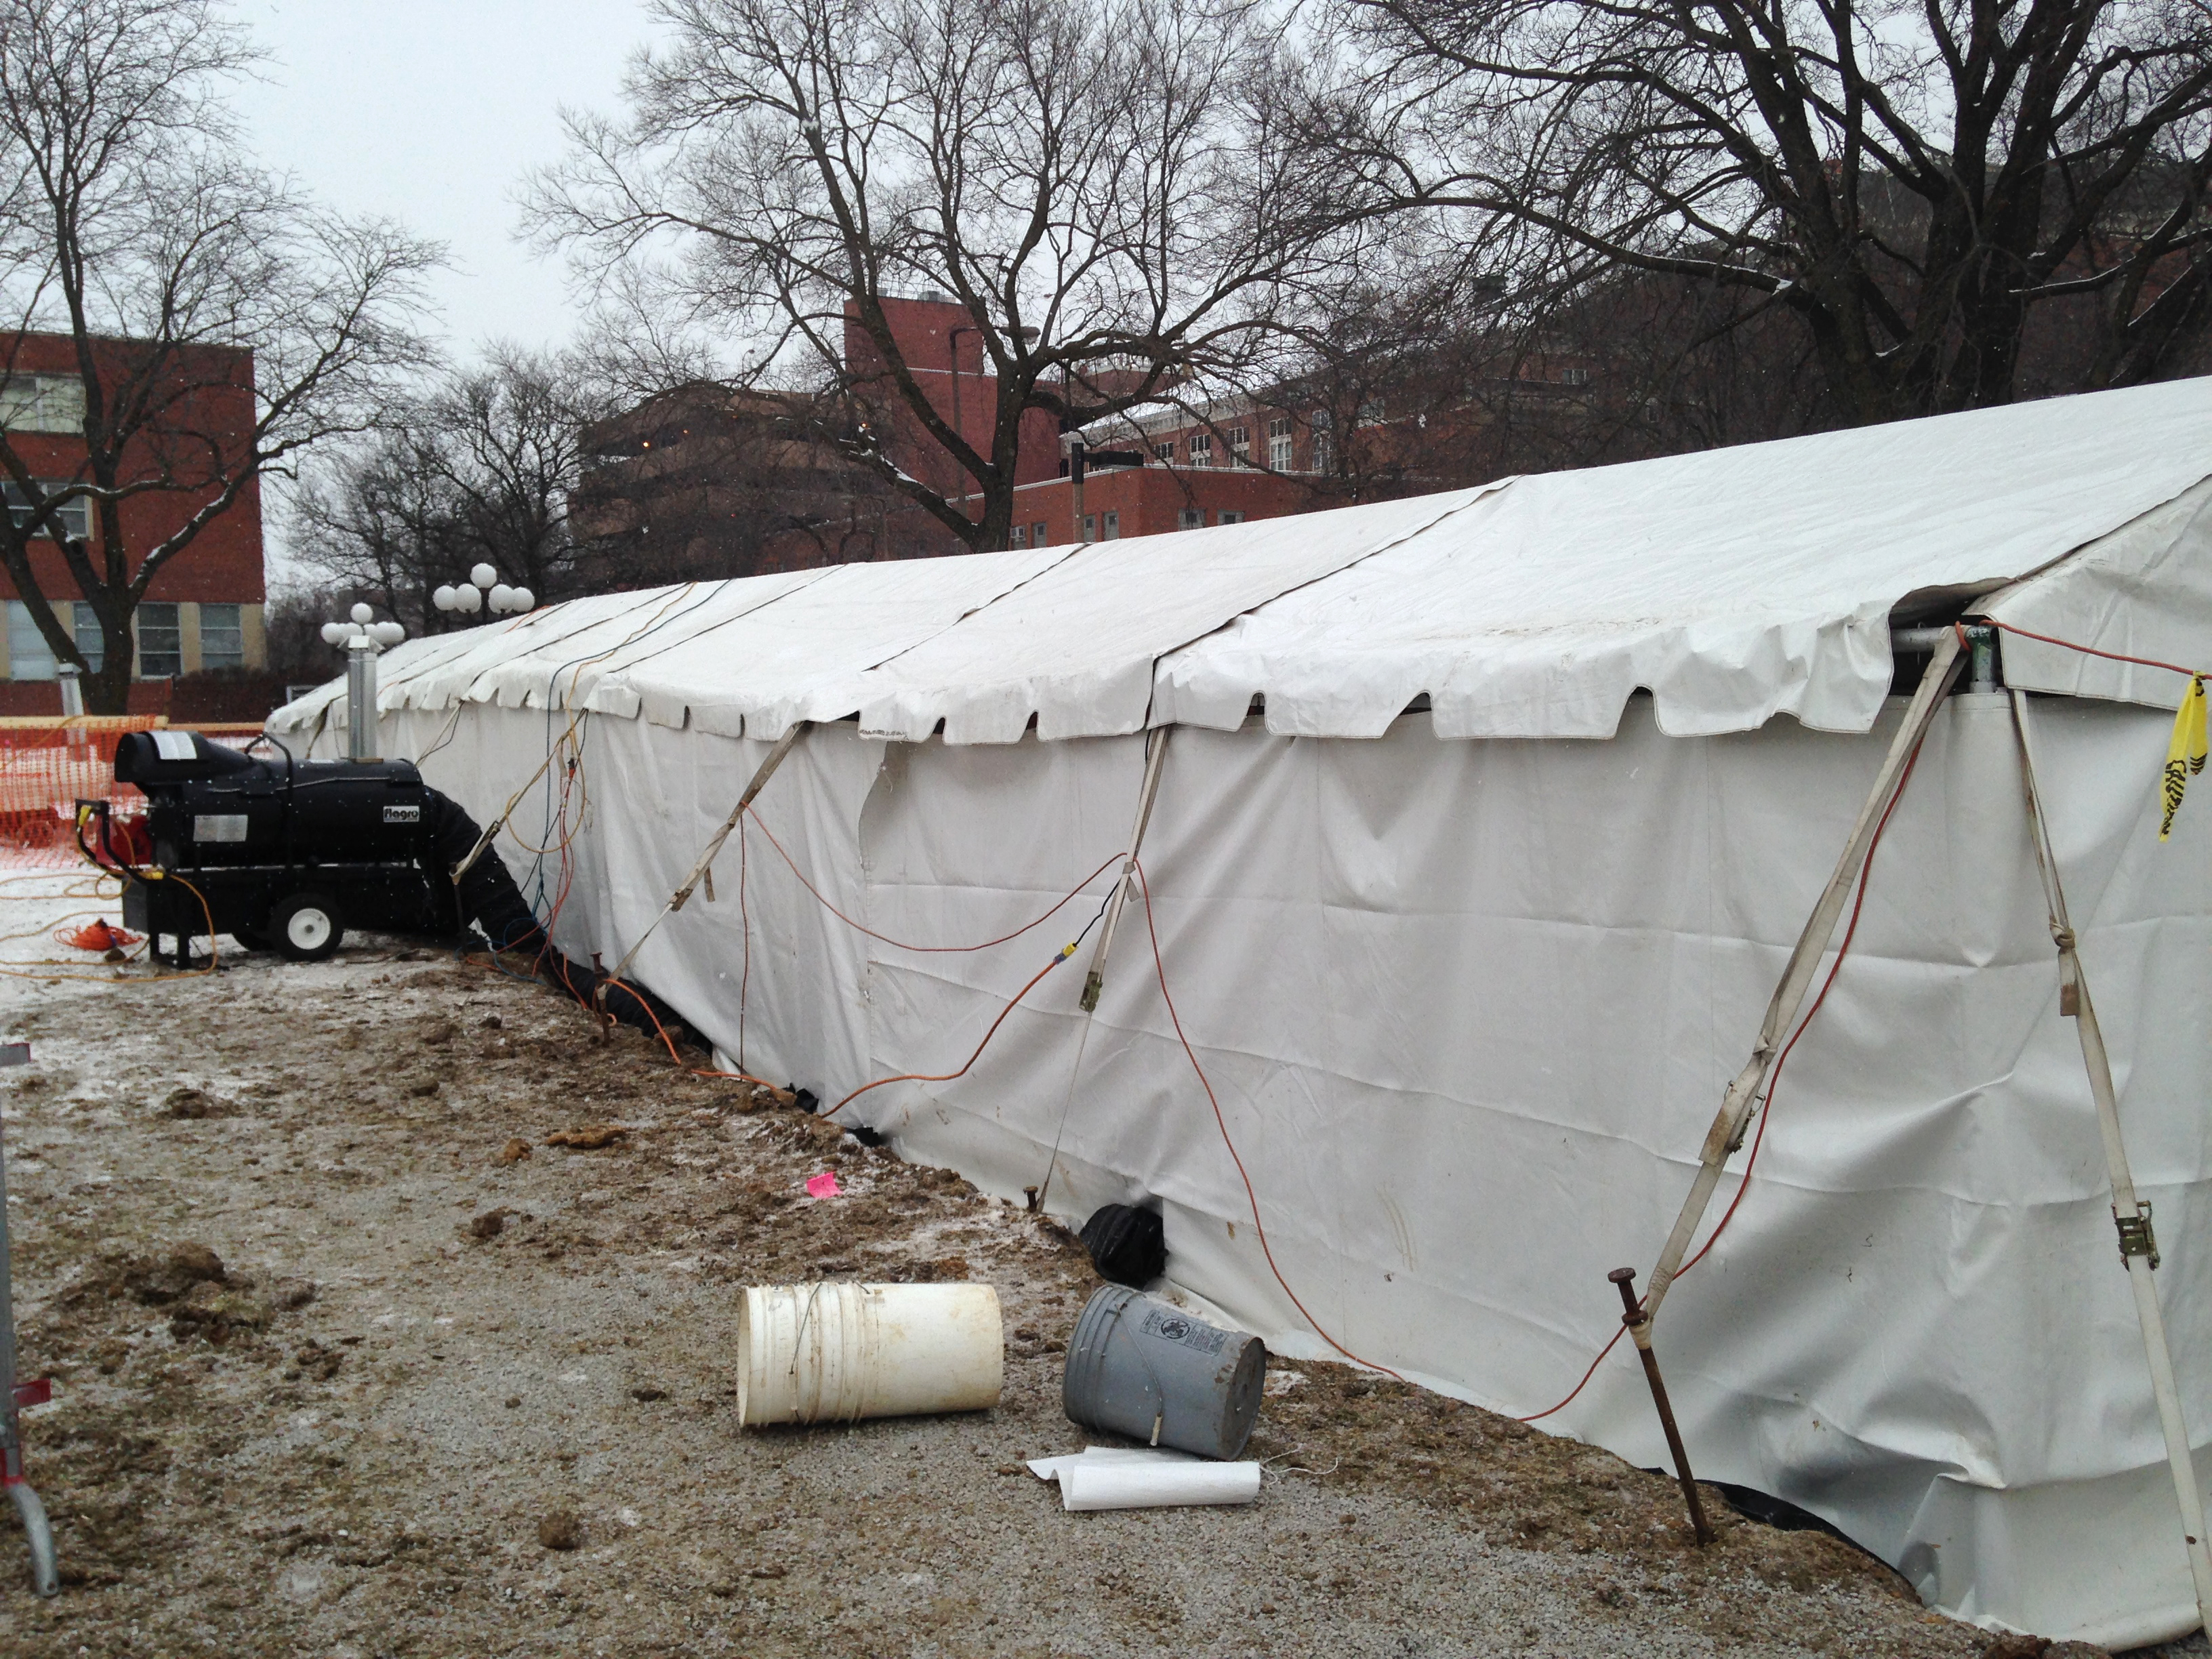 Heated tent for archeological dig in IowaHeated tent for archeological dig in Iowa